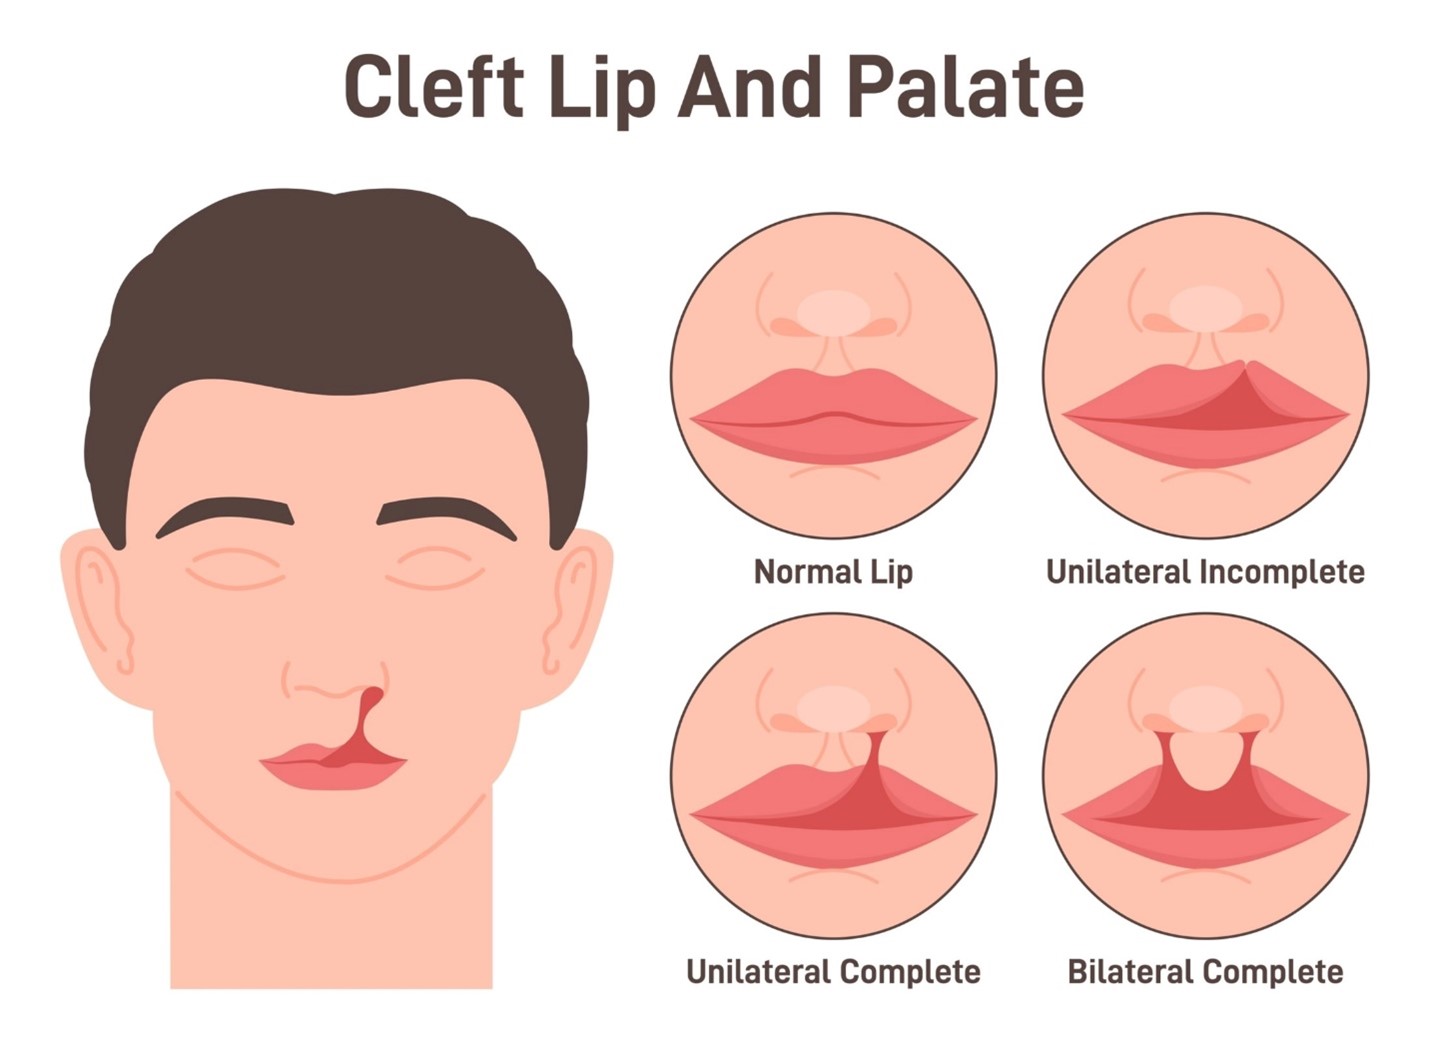 Cleft Lip and Palate awareness